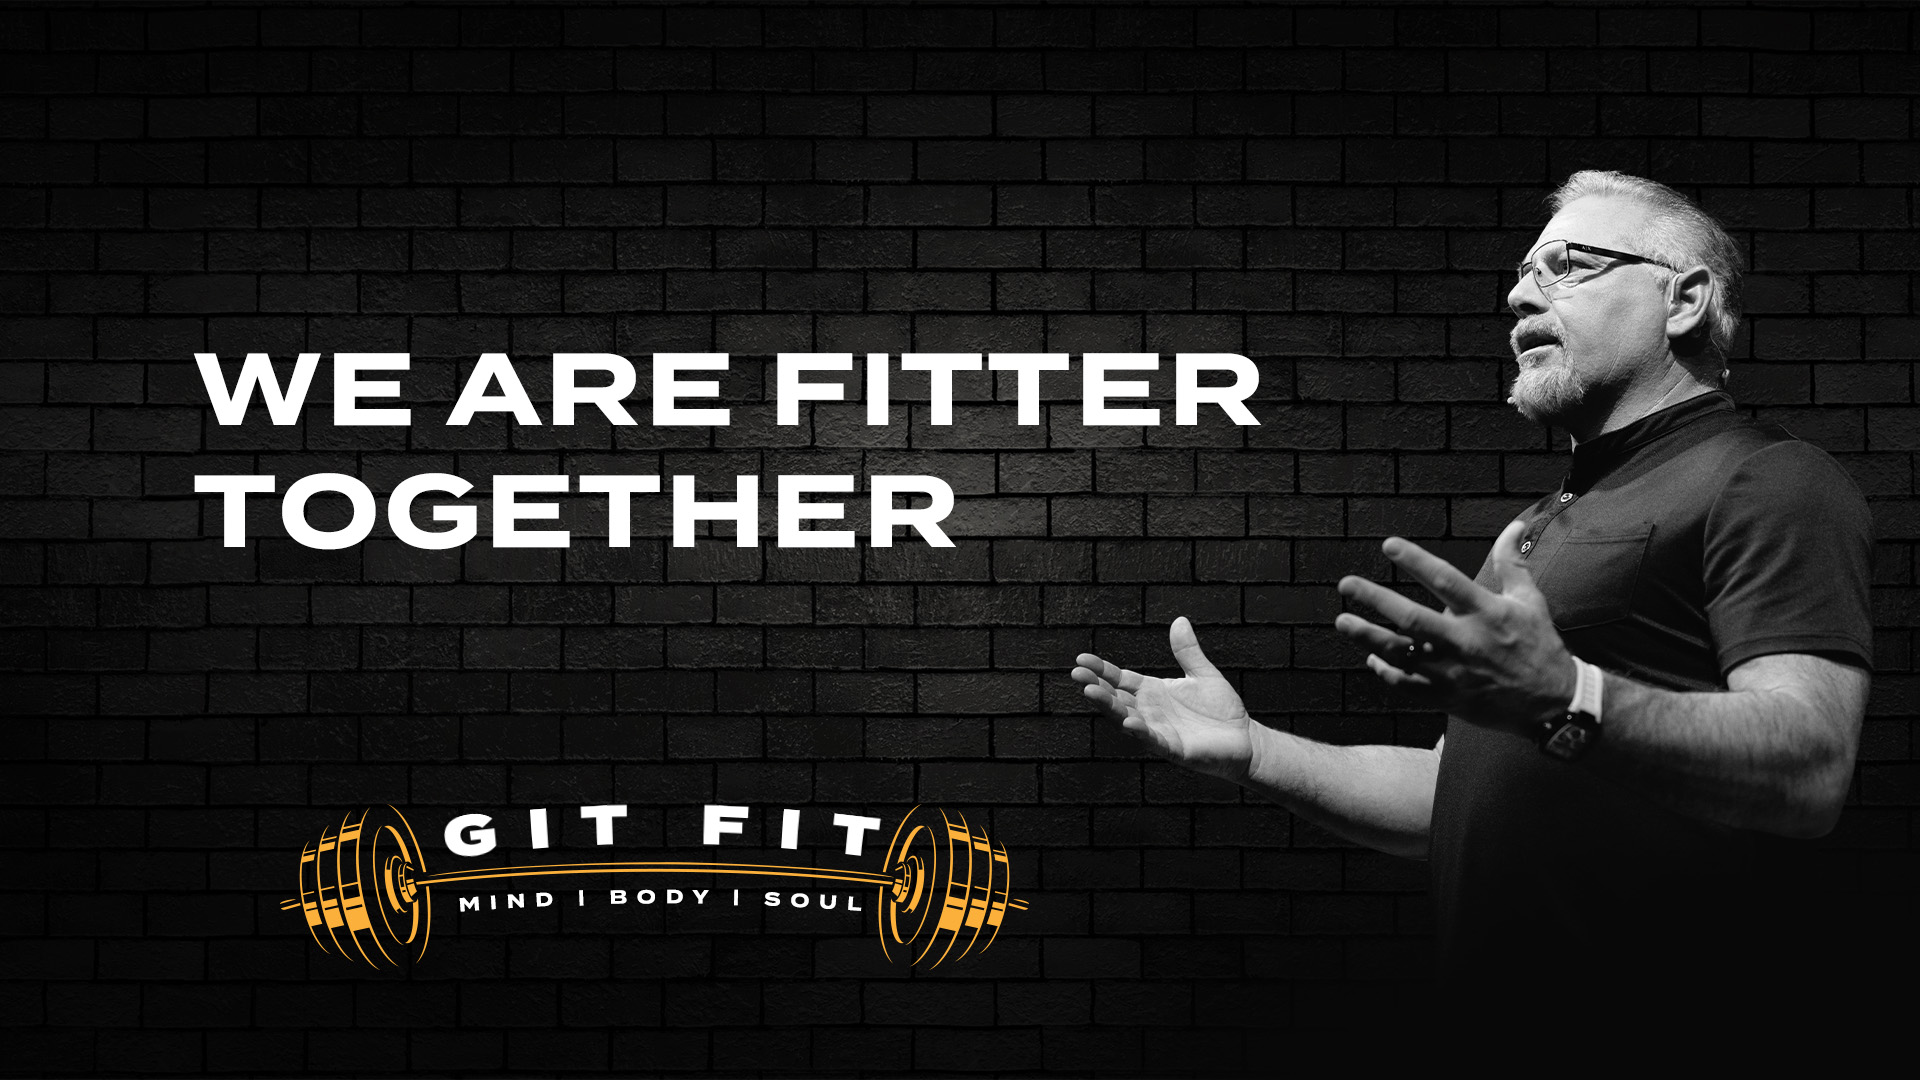 We Are Fitter Together